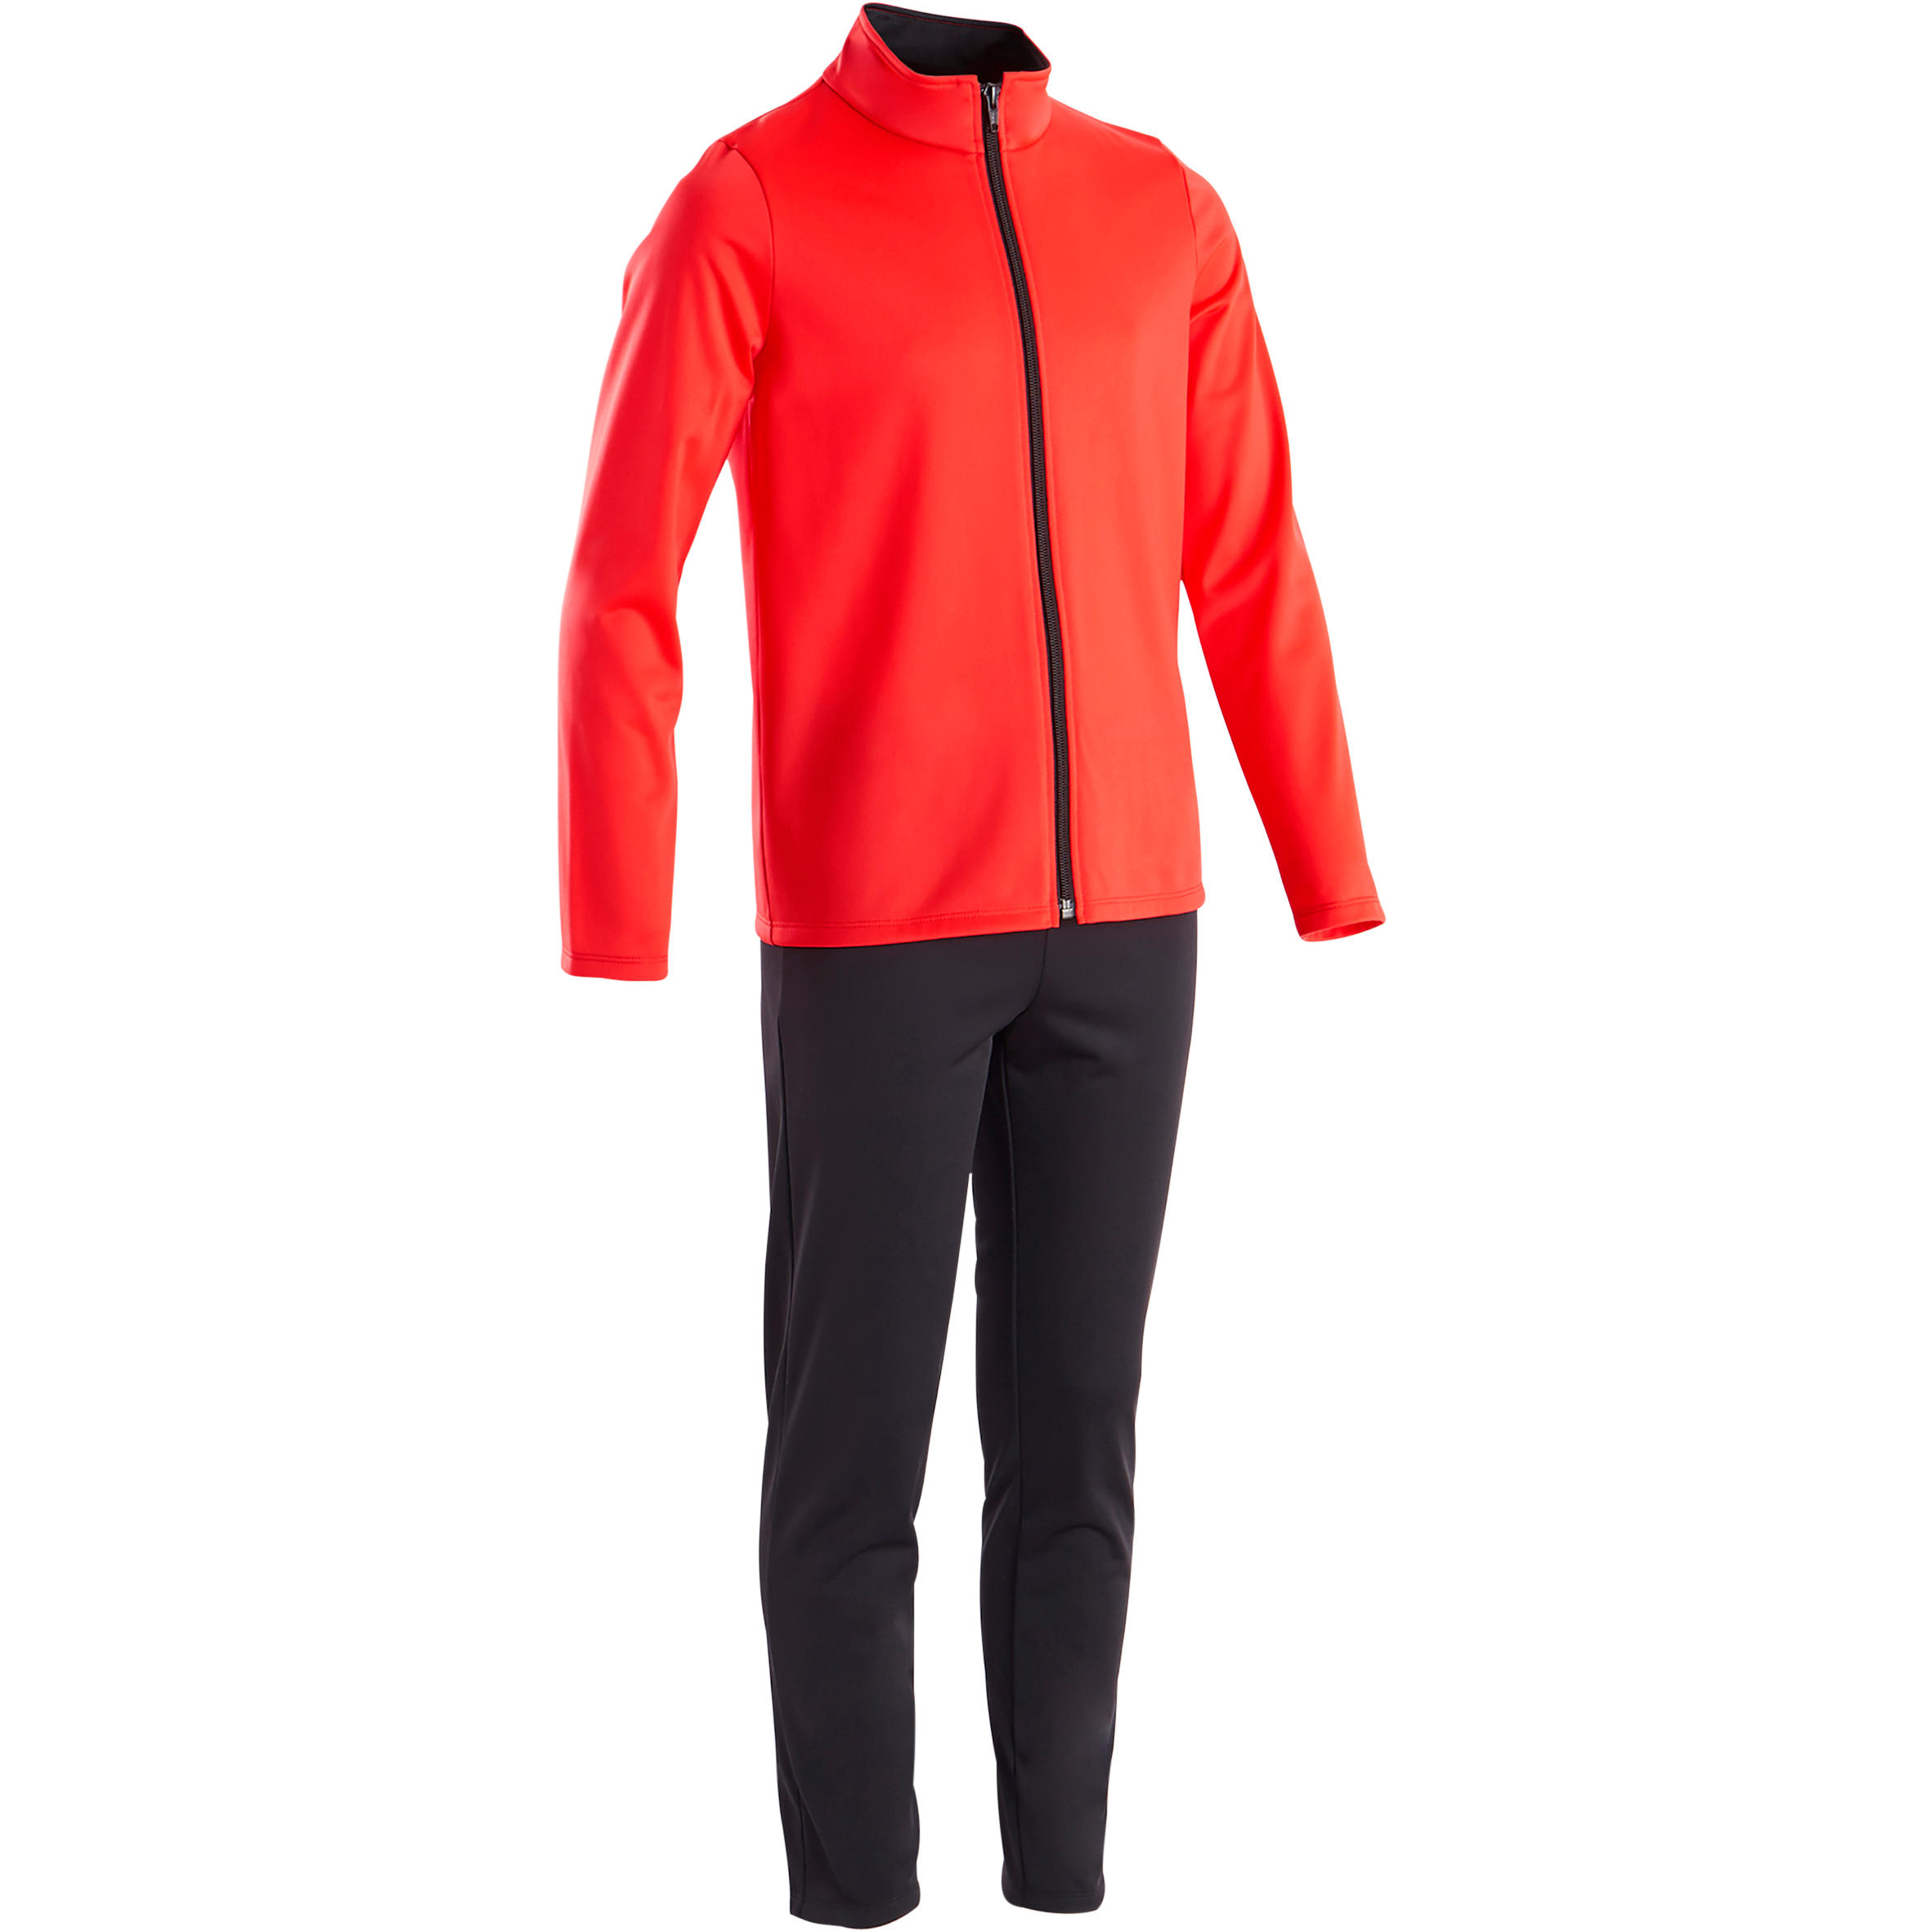 DOMYOS Girls' Warm Breathable Synthetic Gym Tracksuit Gym'y S500 - Red